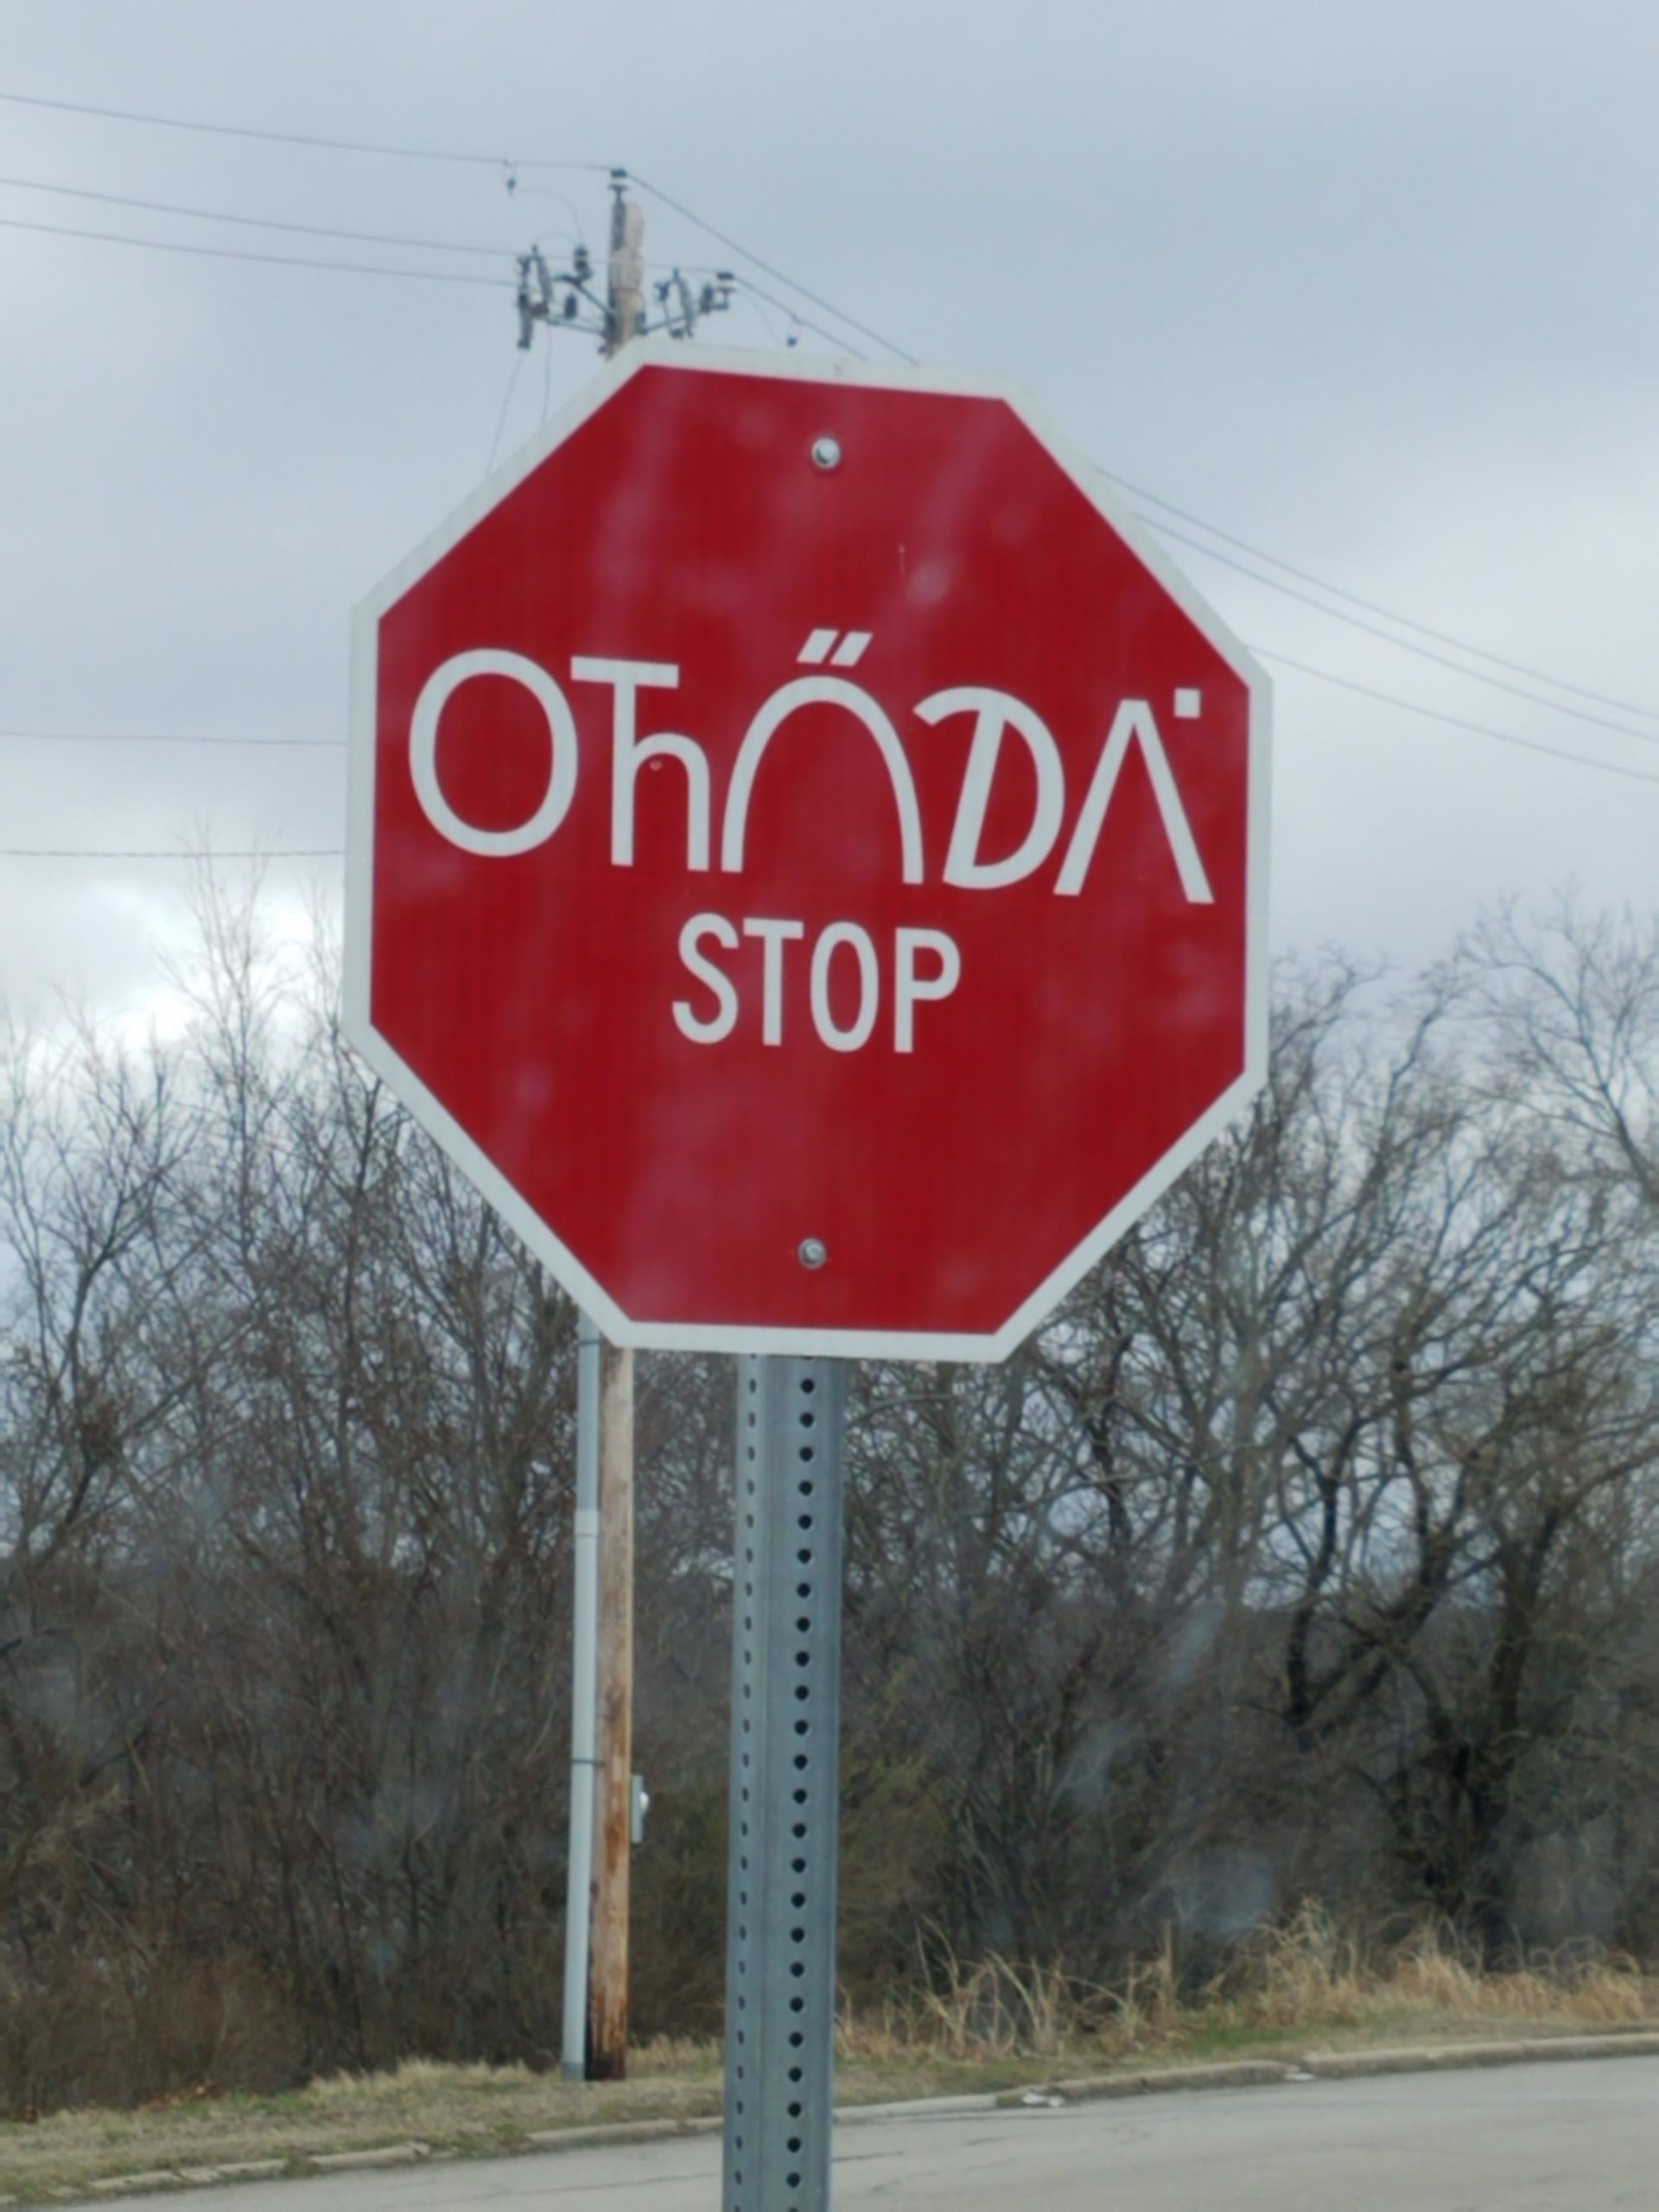 This+STOP+sign+in+Pawhuska%2C+Oklahoma+featuring+the+Osage+Indian+language